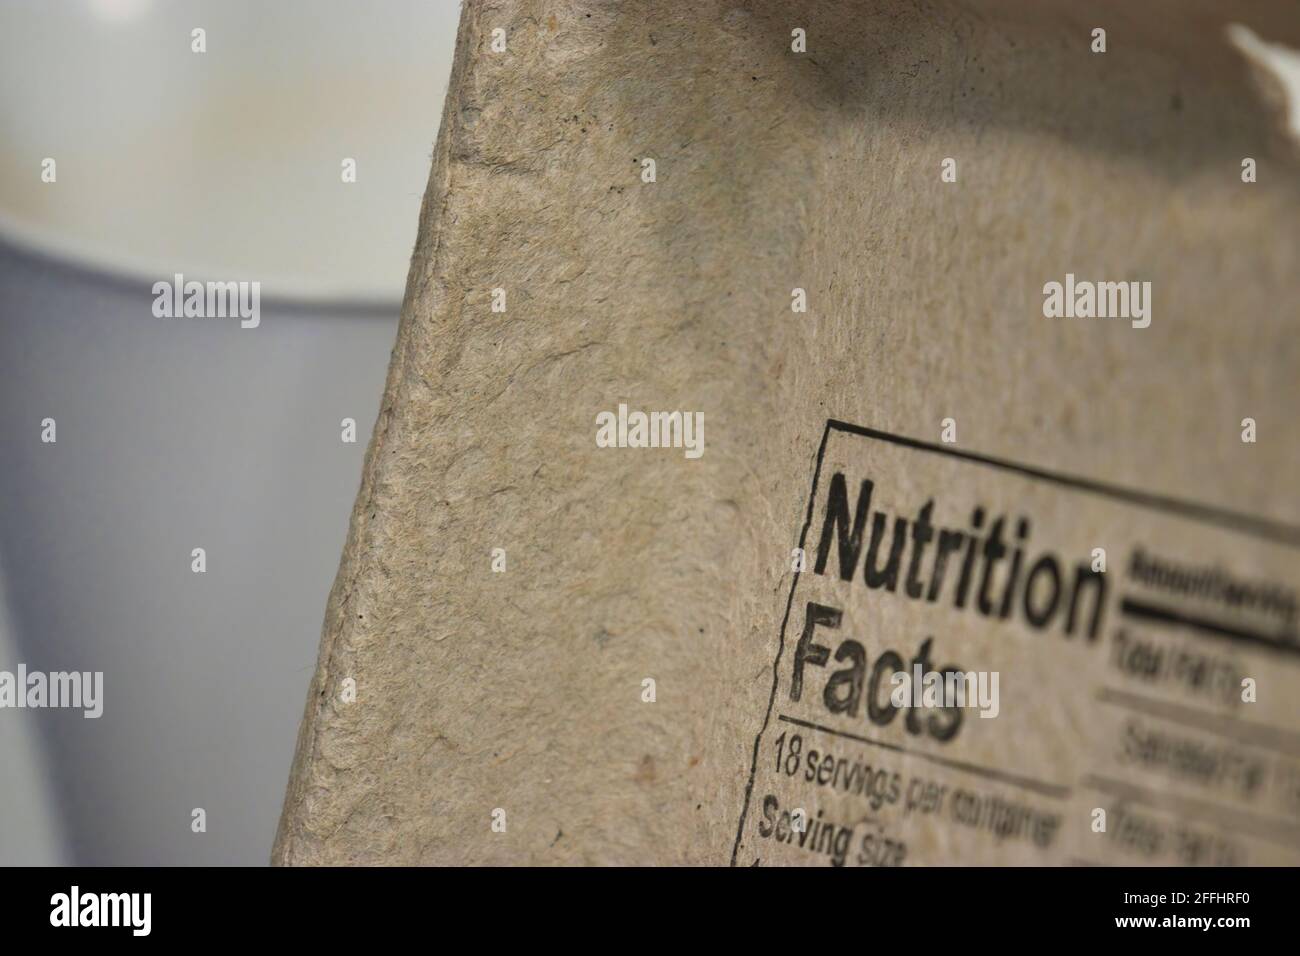 egg carton lid with the words nutritional facts printed on the inside Stock Photo